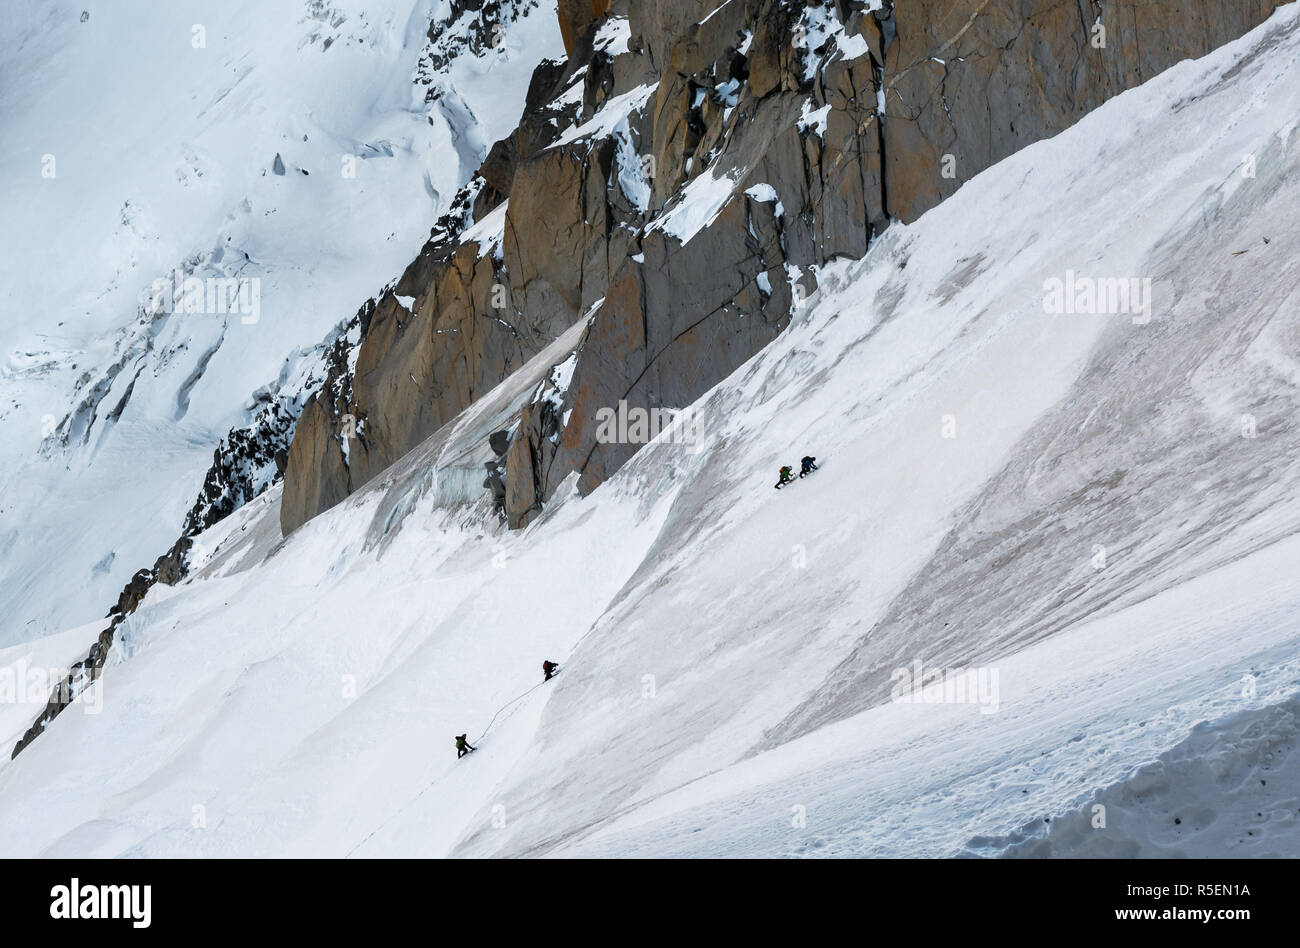 Climbers ascending way up to Aiguille du Midi with details of Aiguille du Plan in background Stock Photo